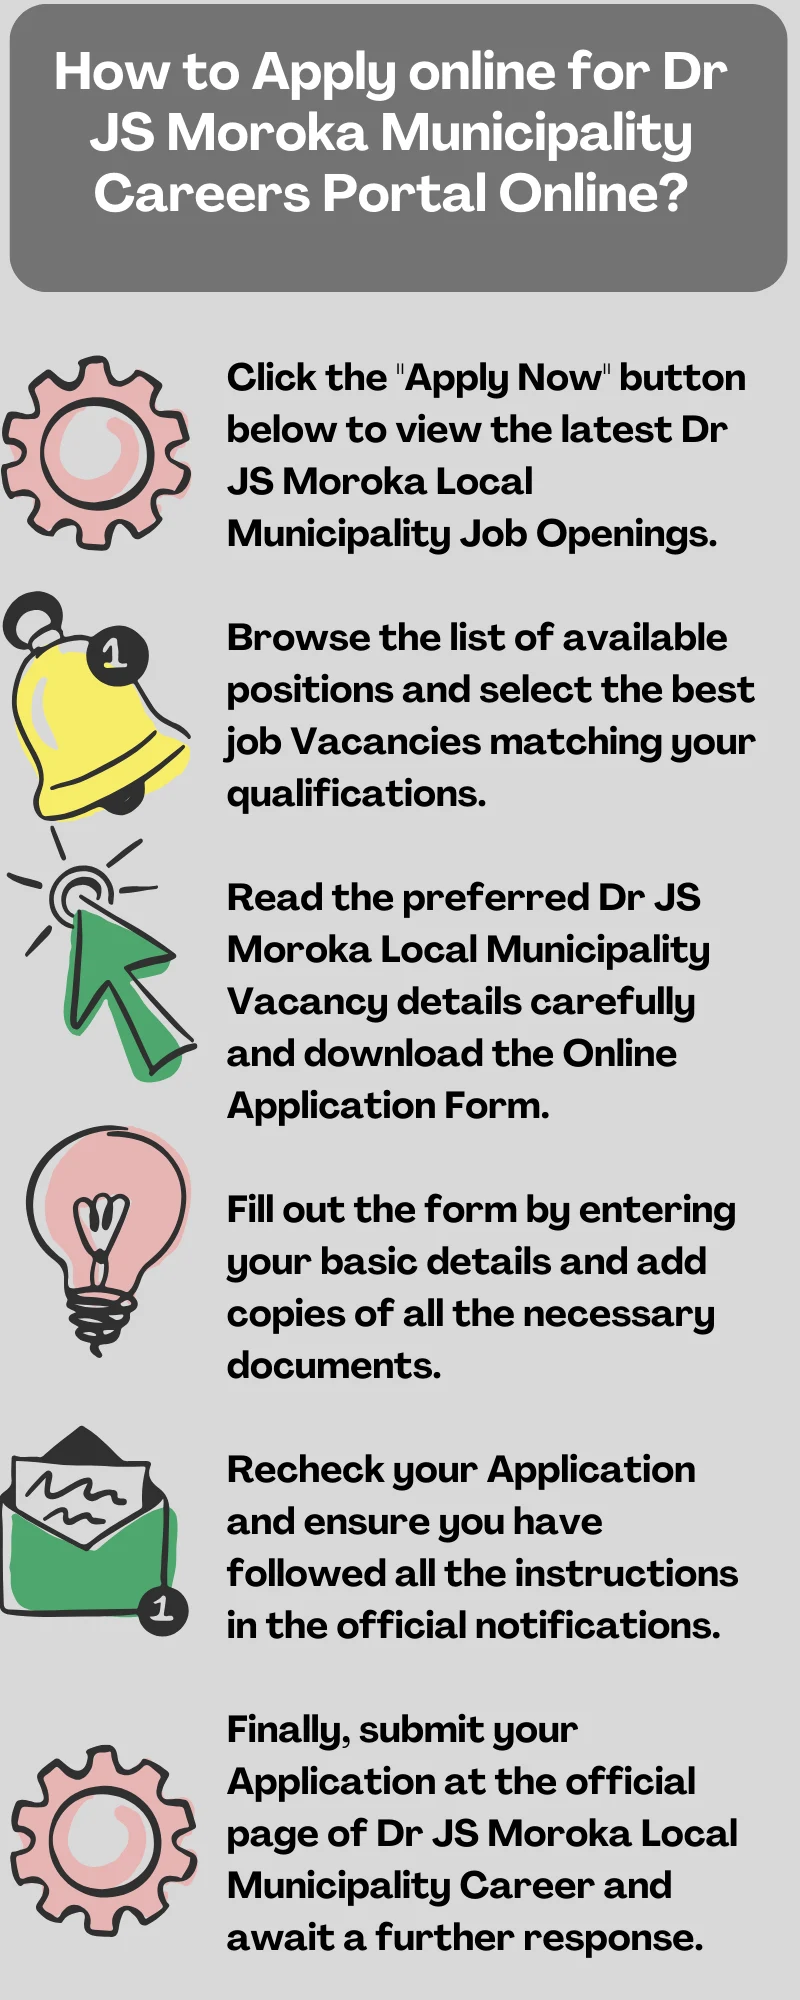 How to Apply online for Dr JS Moroka Municipality Careers Portal Online?